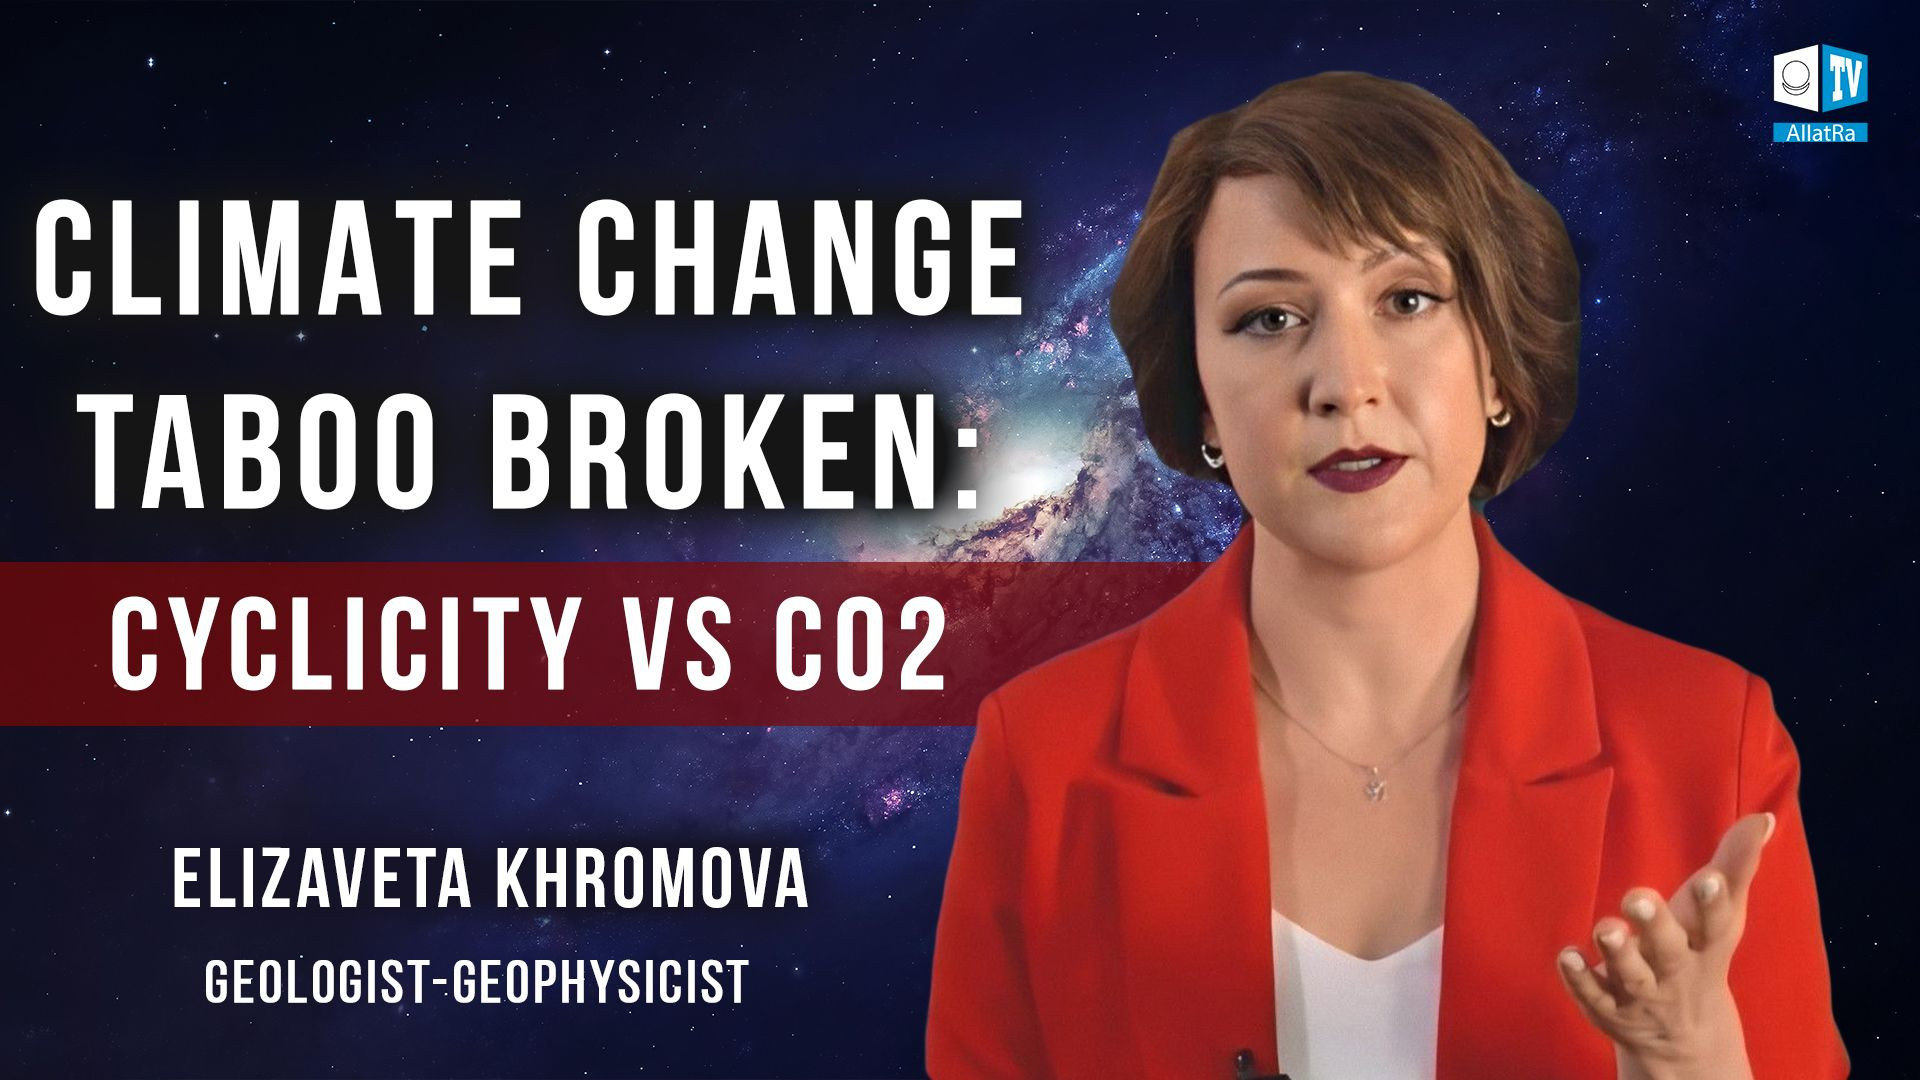 Cyclicity vs CO2. Breaking the taboo on climate change truth